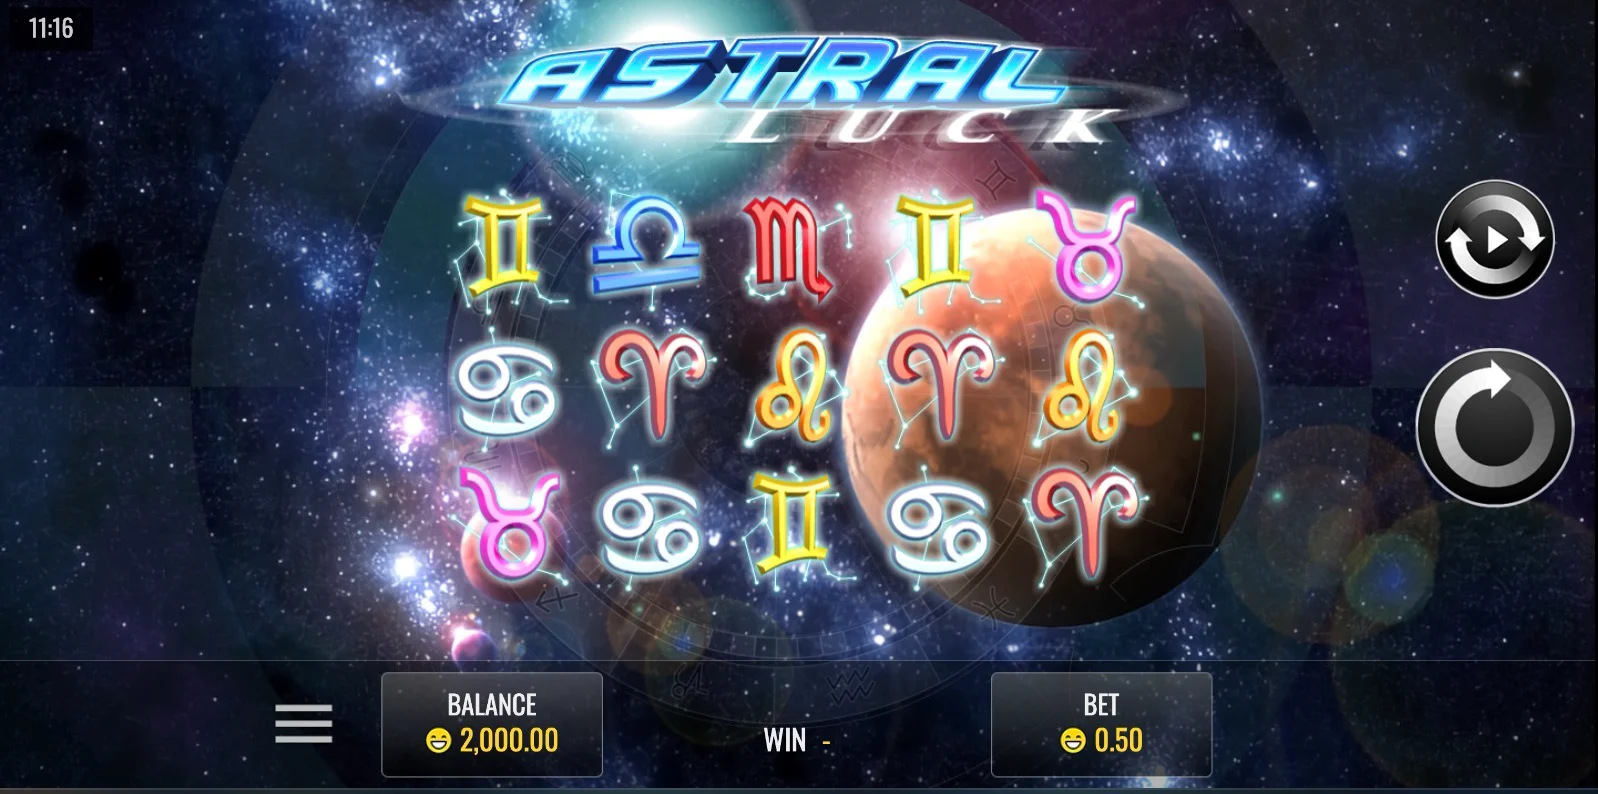 Astral Luck